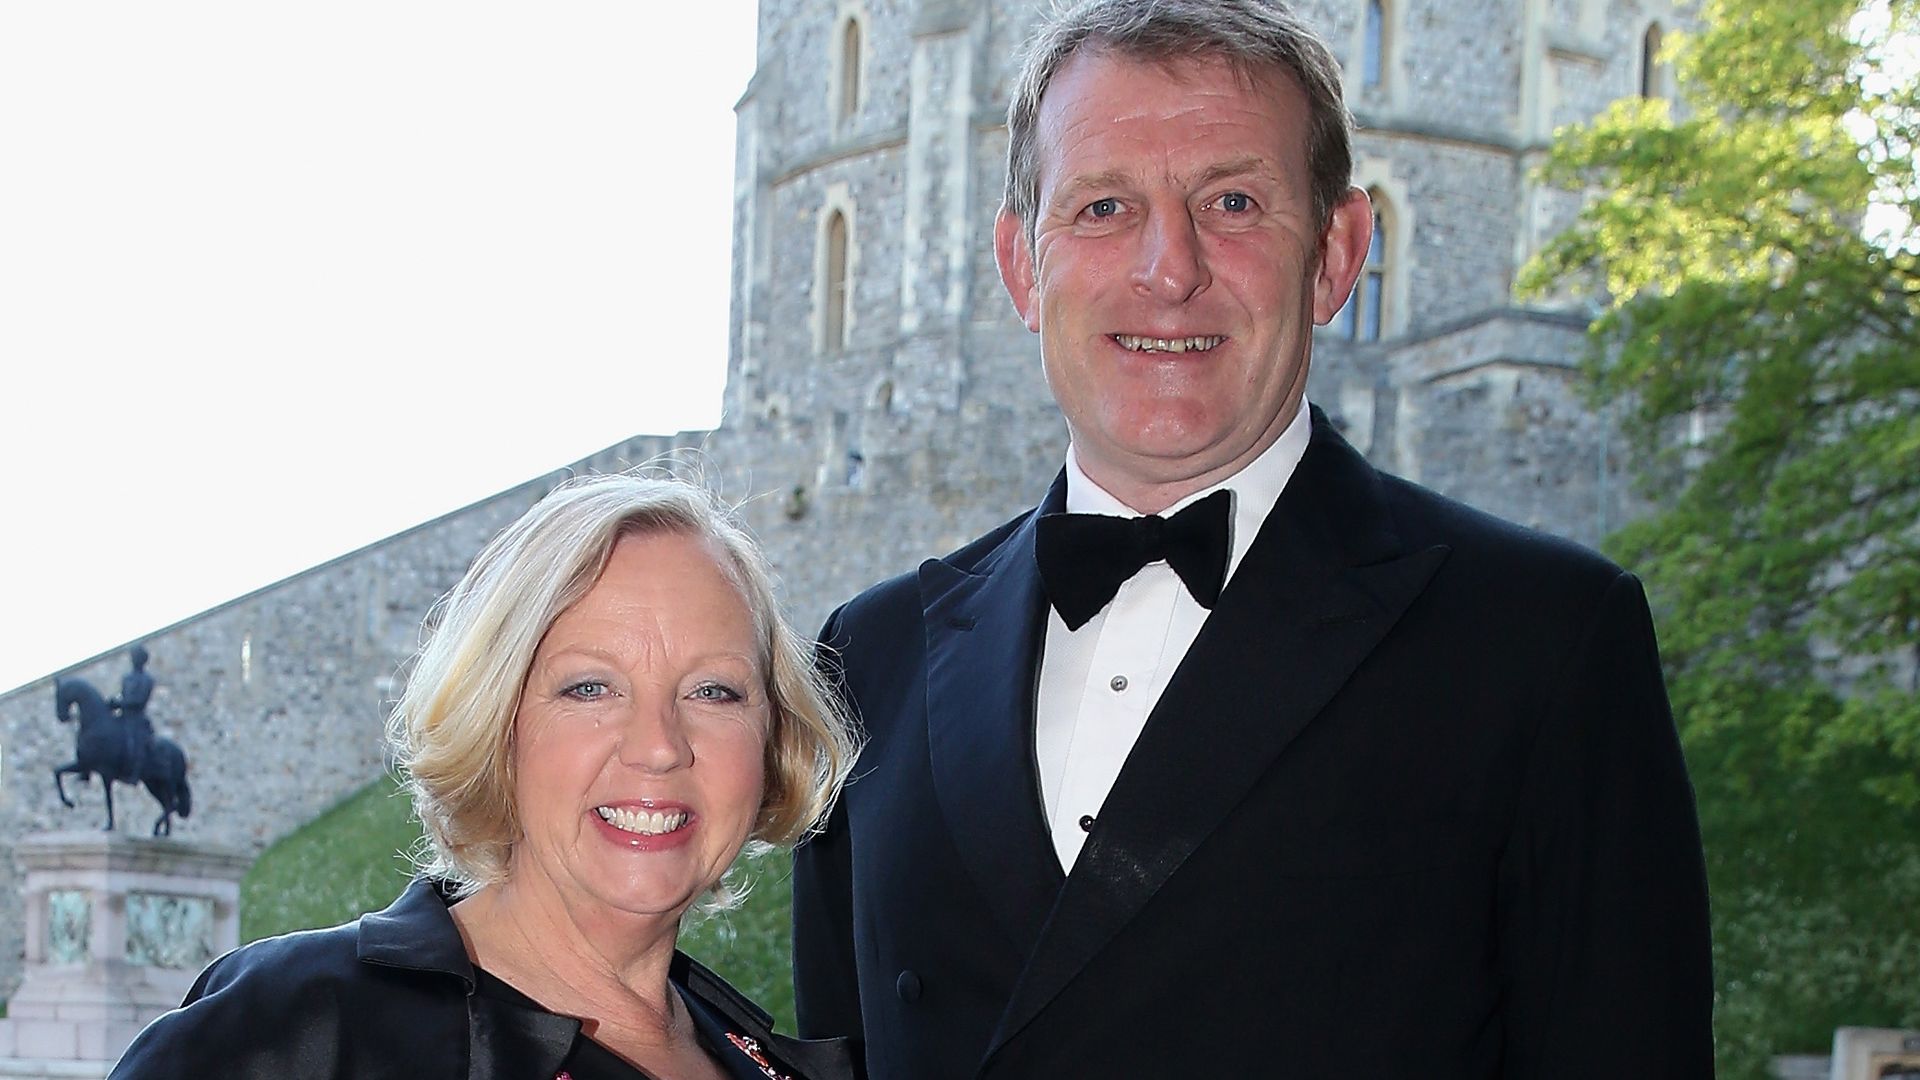 Deborah Meaden in red heels posing outside for a photo with her husband Paul